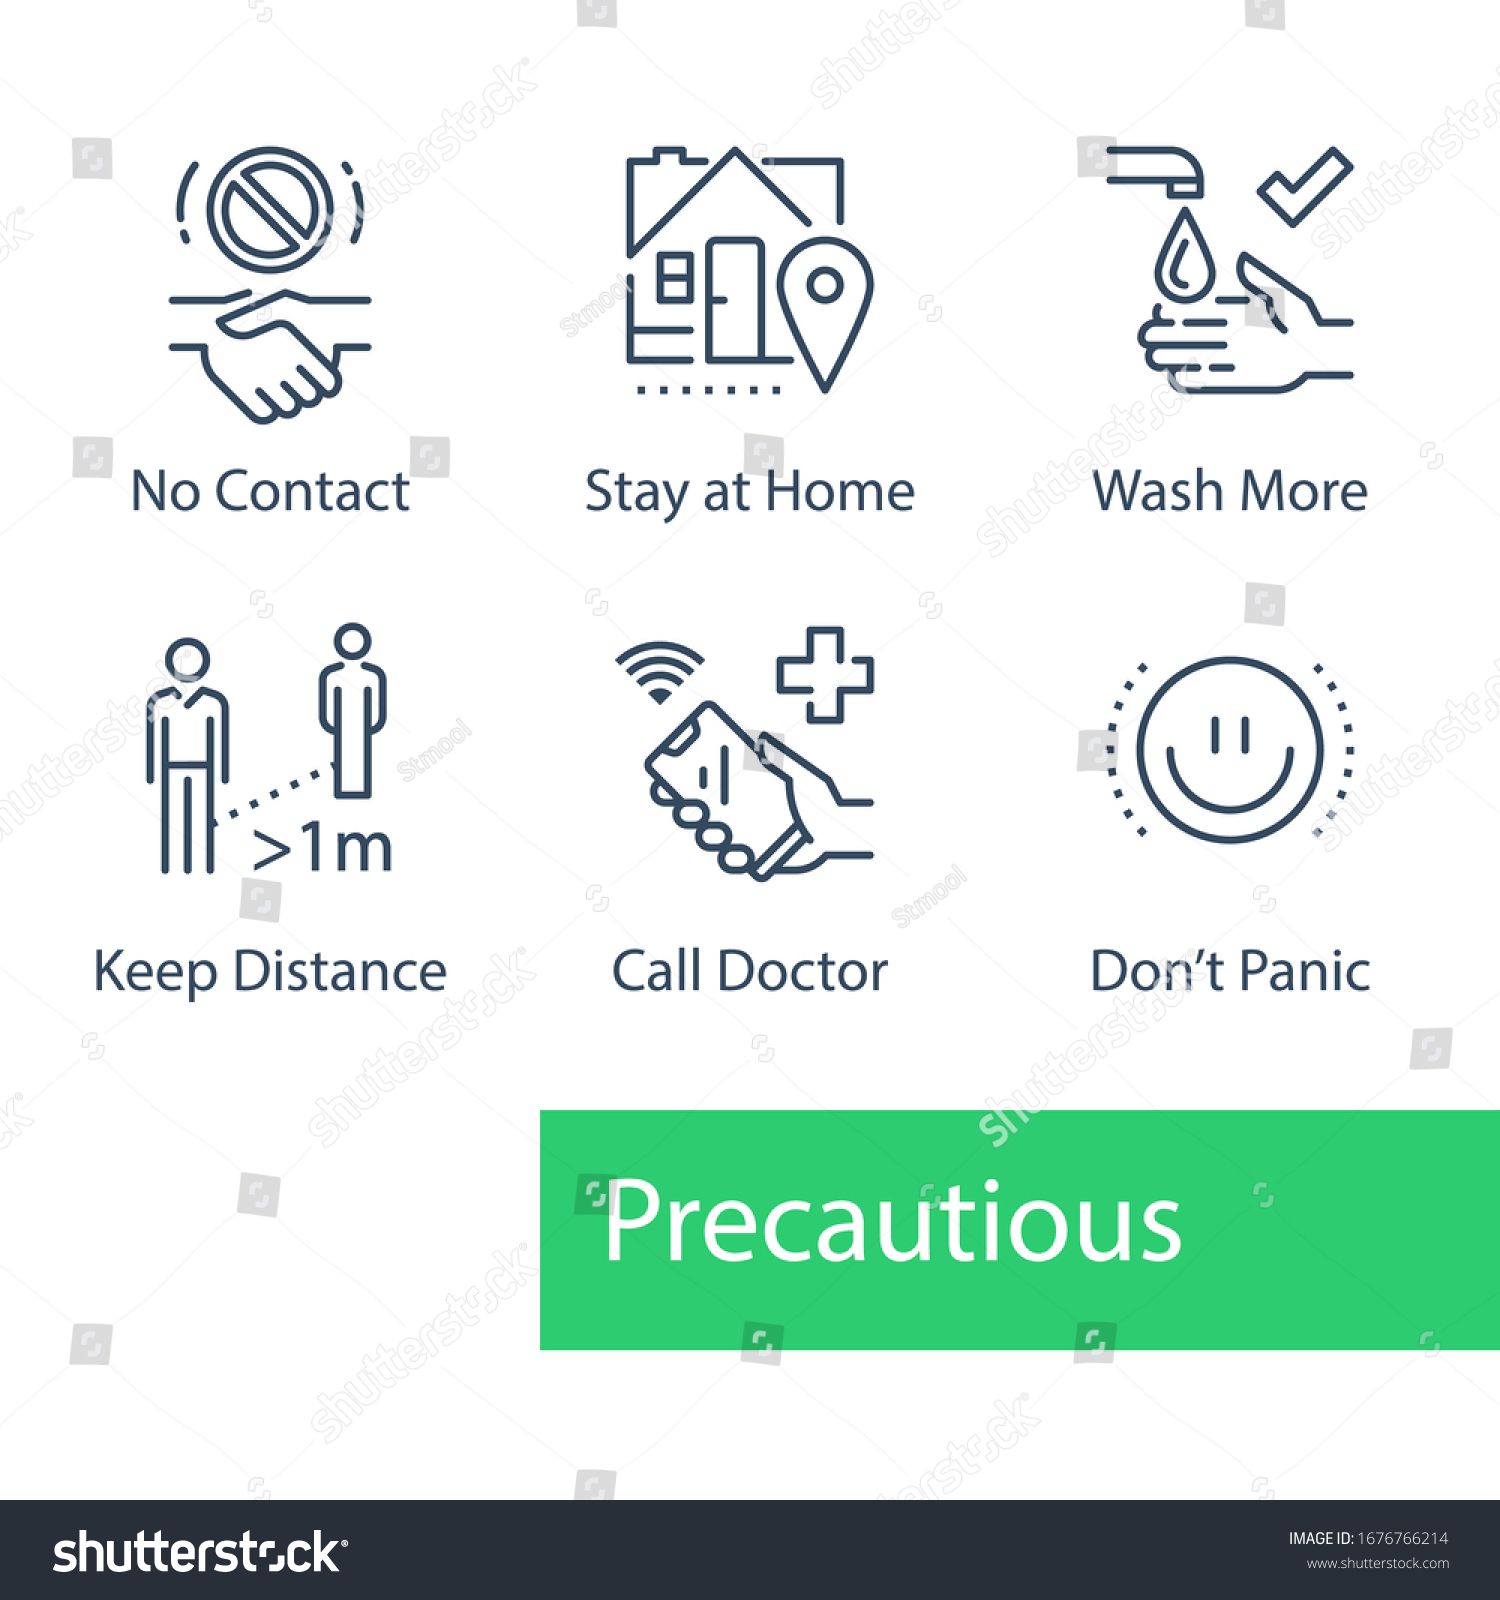 Virus outbreak precautions, preventive measures, safety instructions, pandemic quarantine, warning advice, flu spread, avoid social contact, stay home, wash hand, keep distance, call doctor, icon set #1676766214